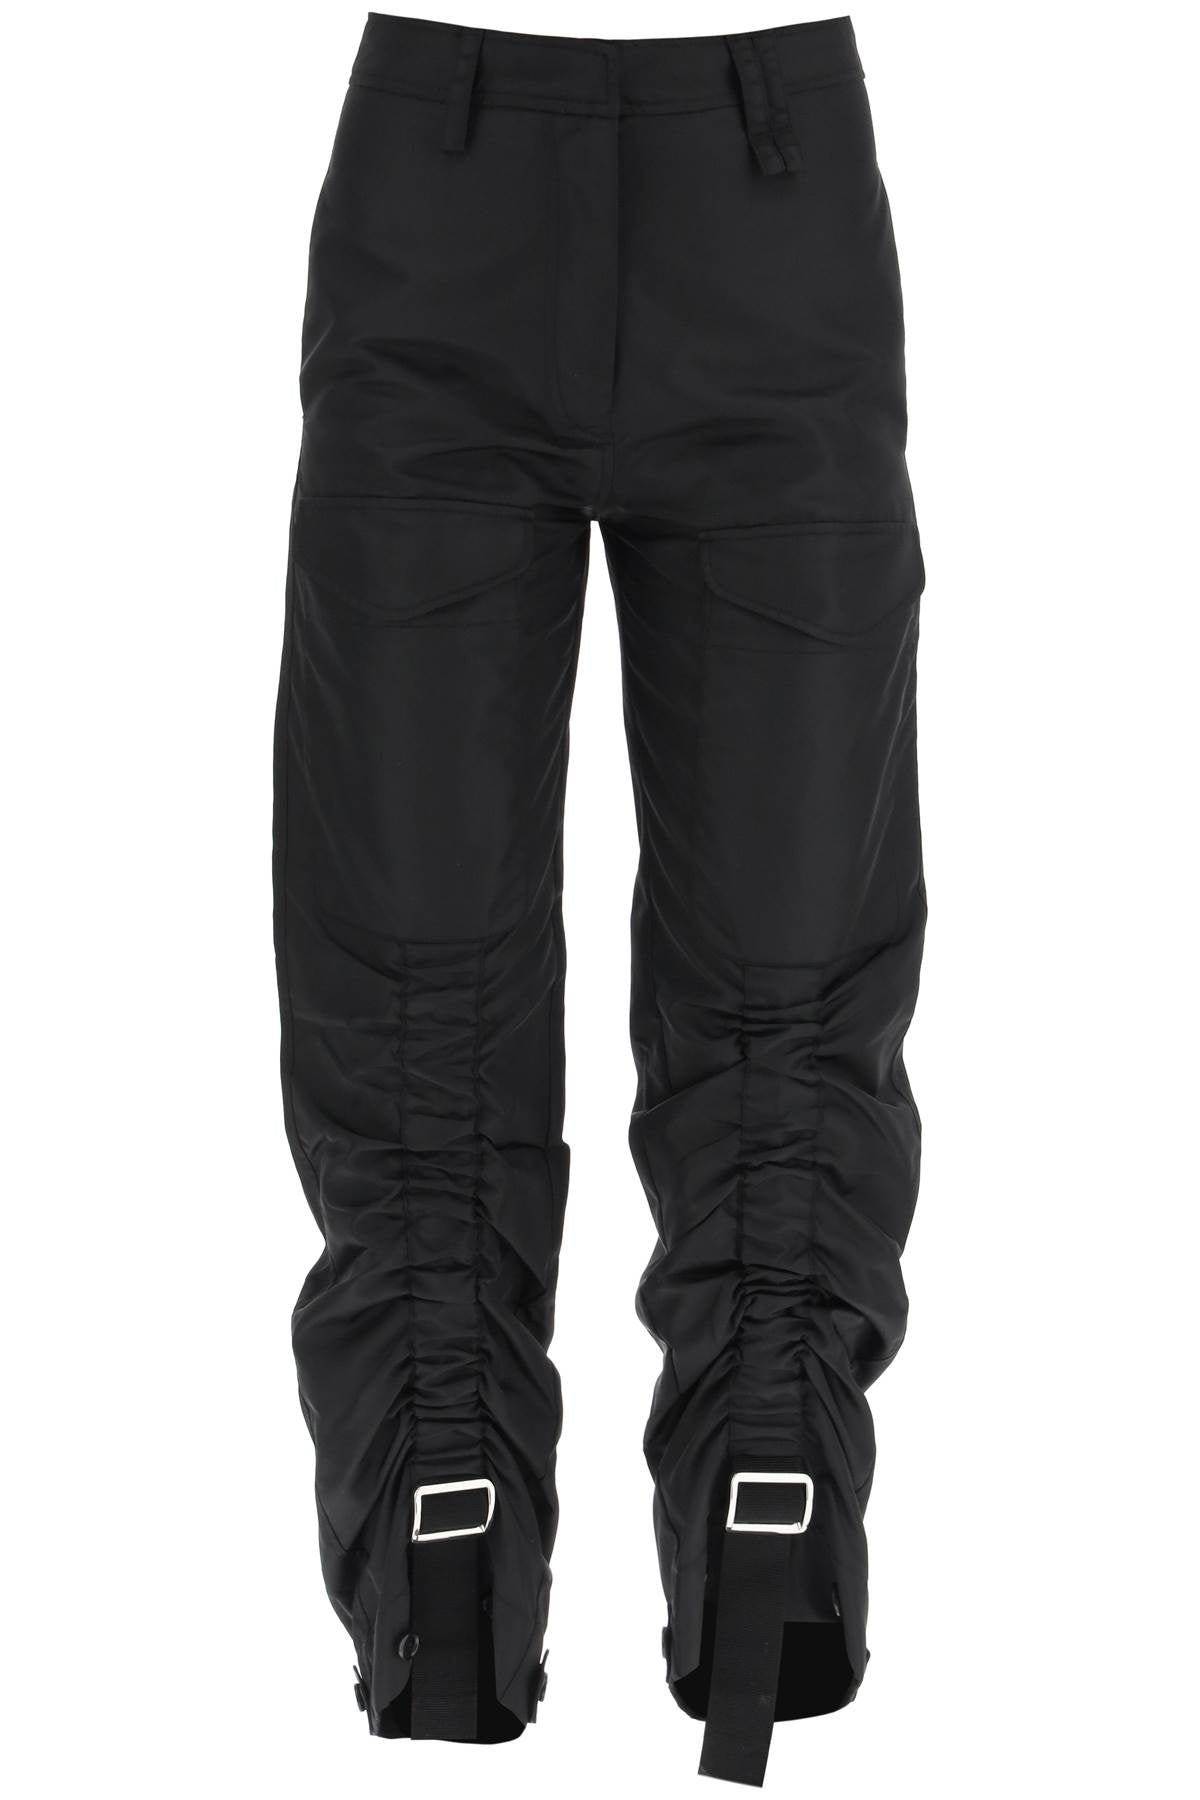 Black Satin Cargo Pants with Adjustable Design - SS23 Collection